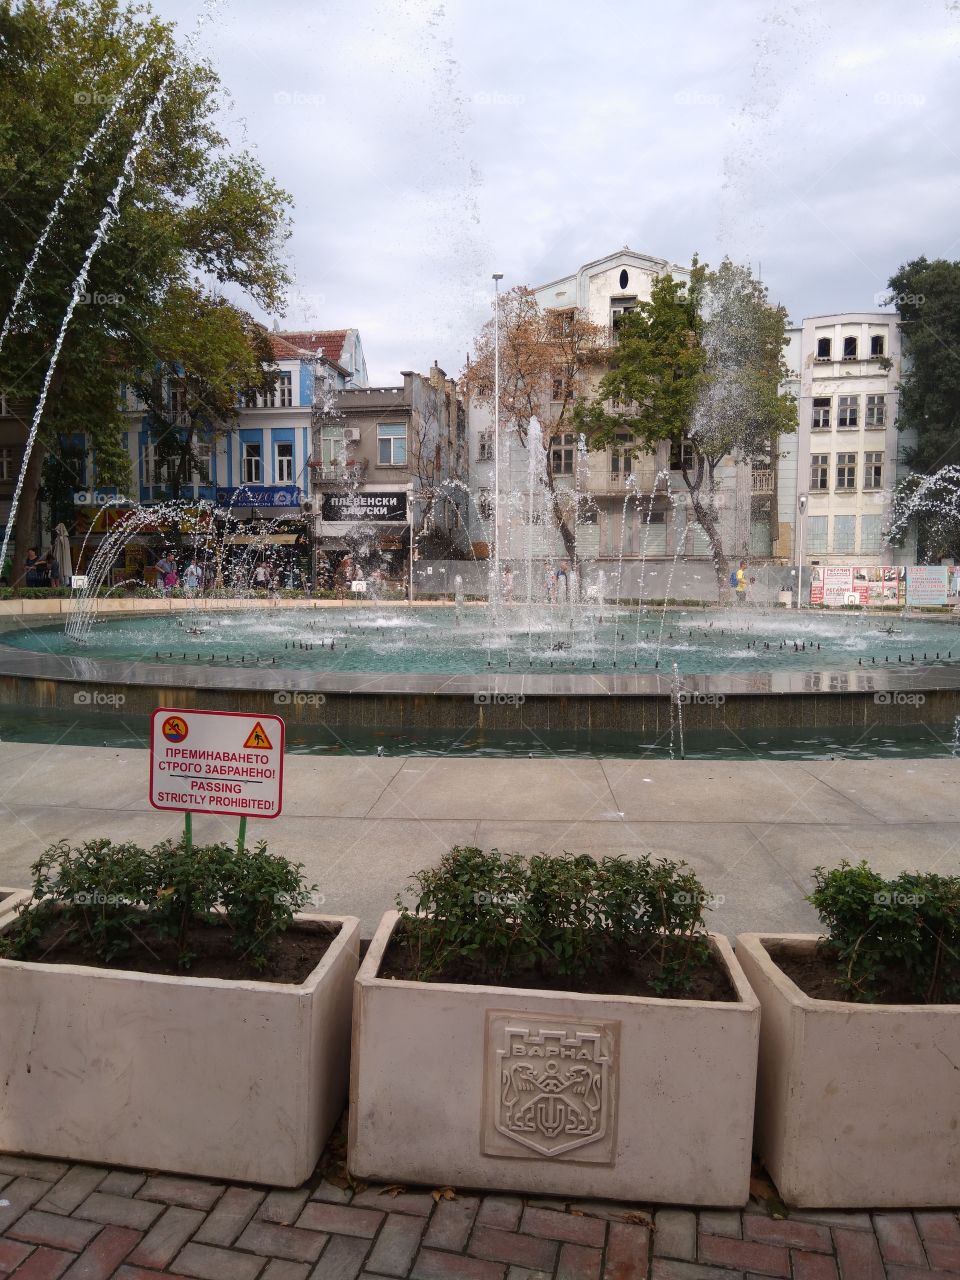 The fountains in Varna, Bulgaria